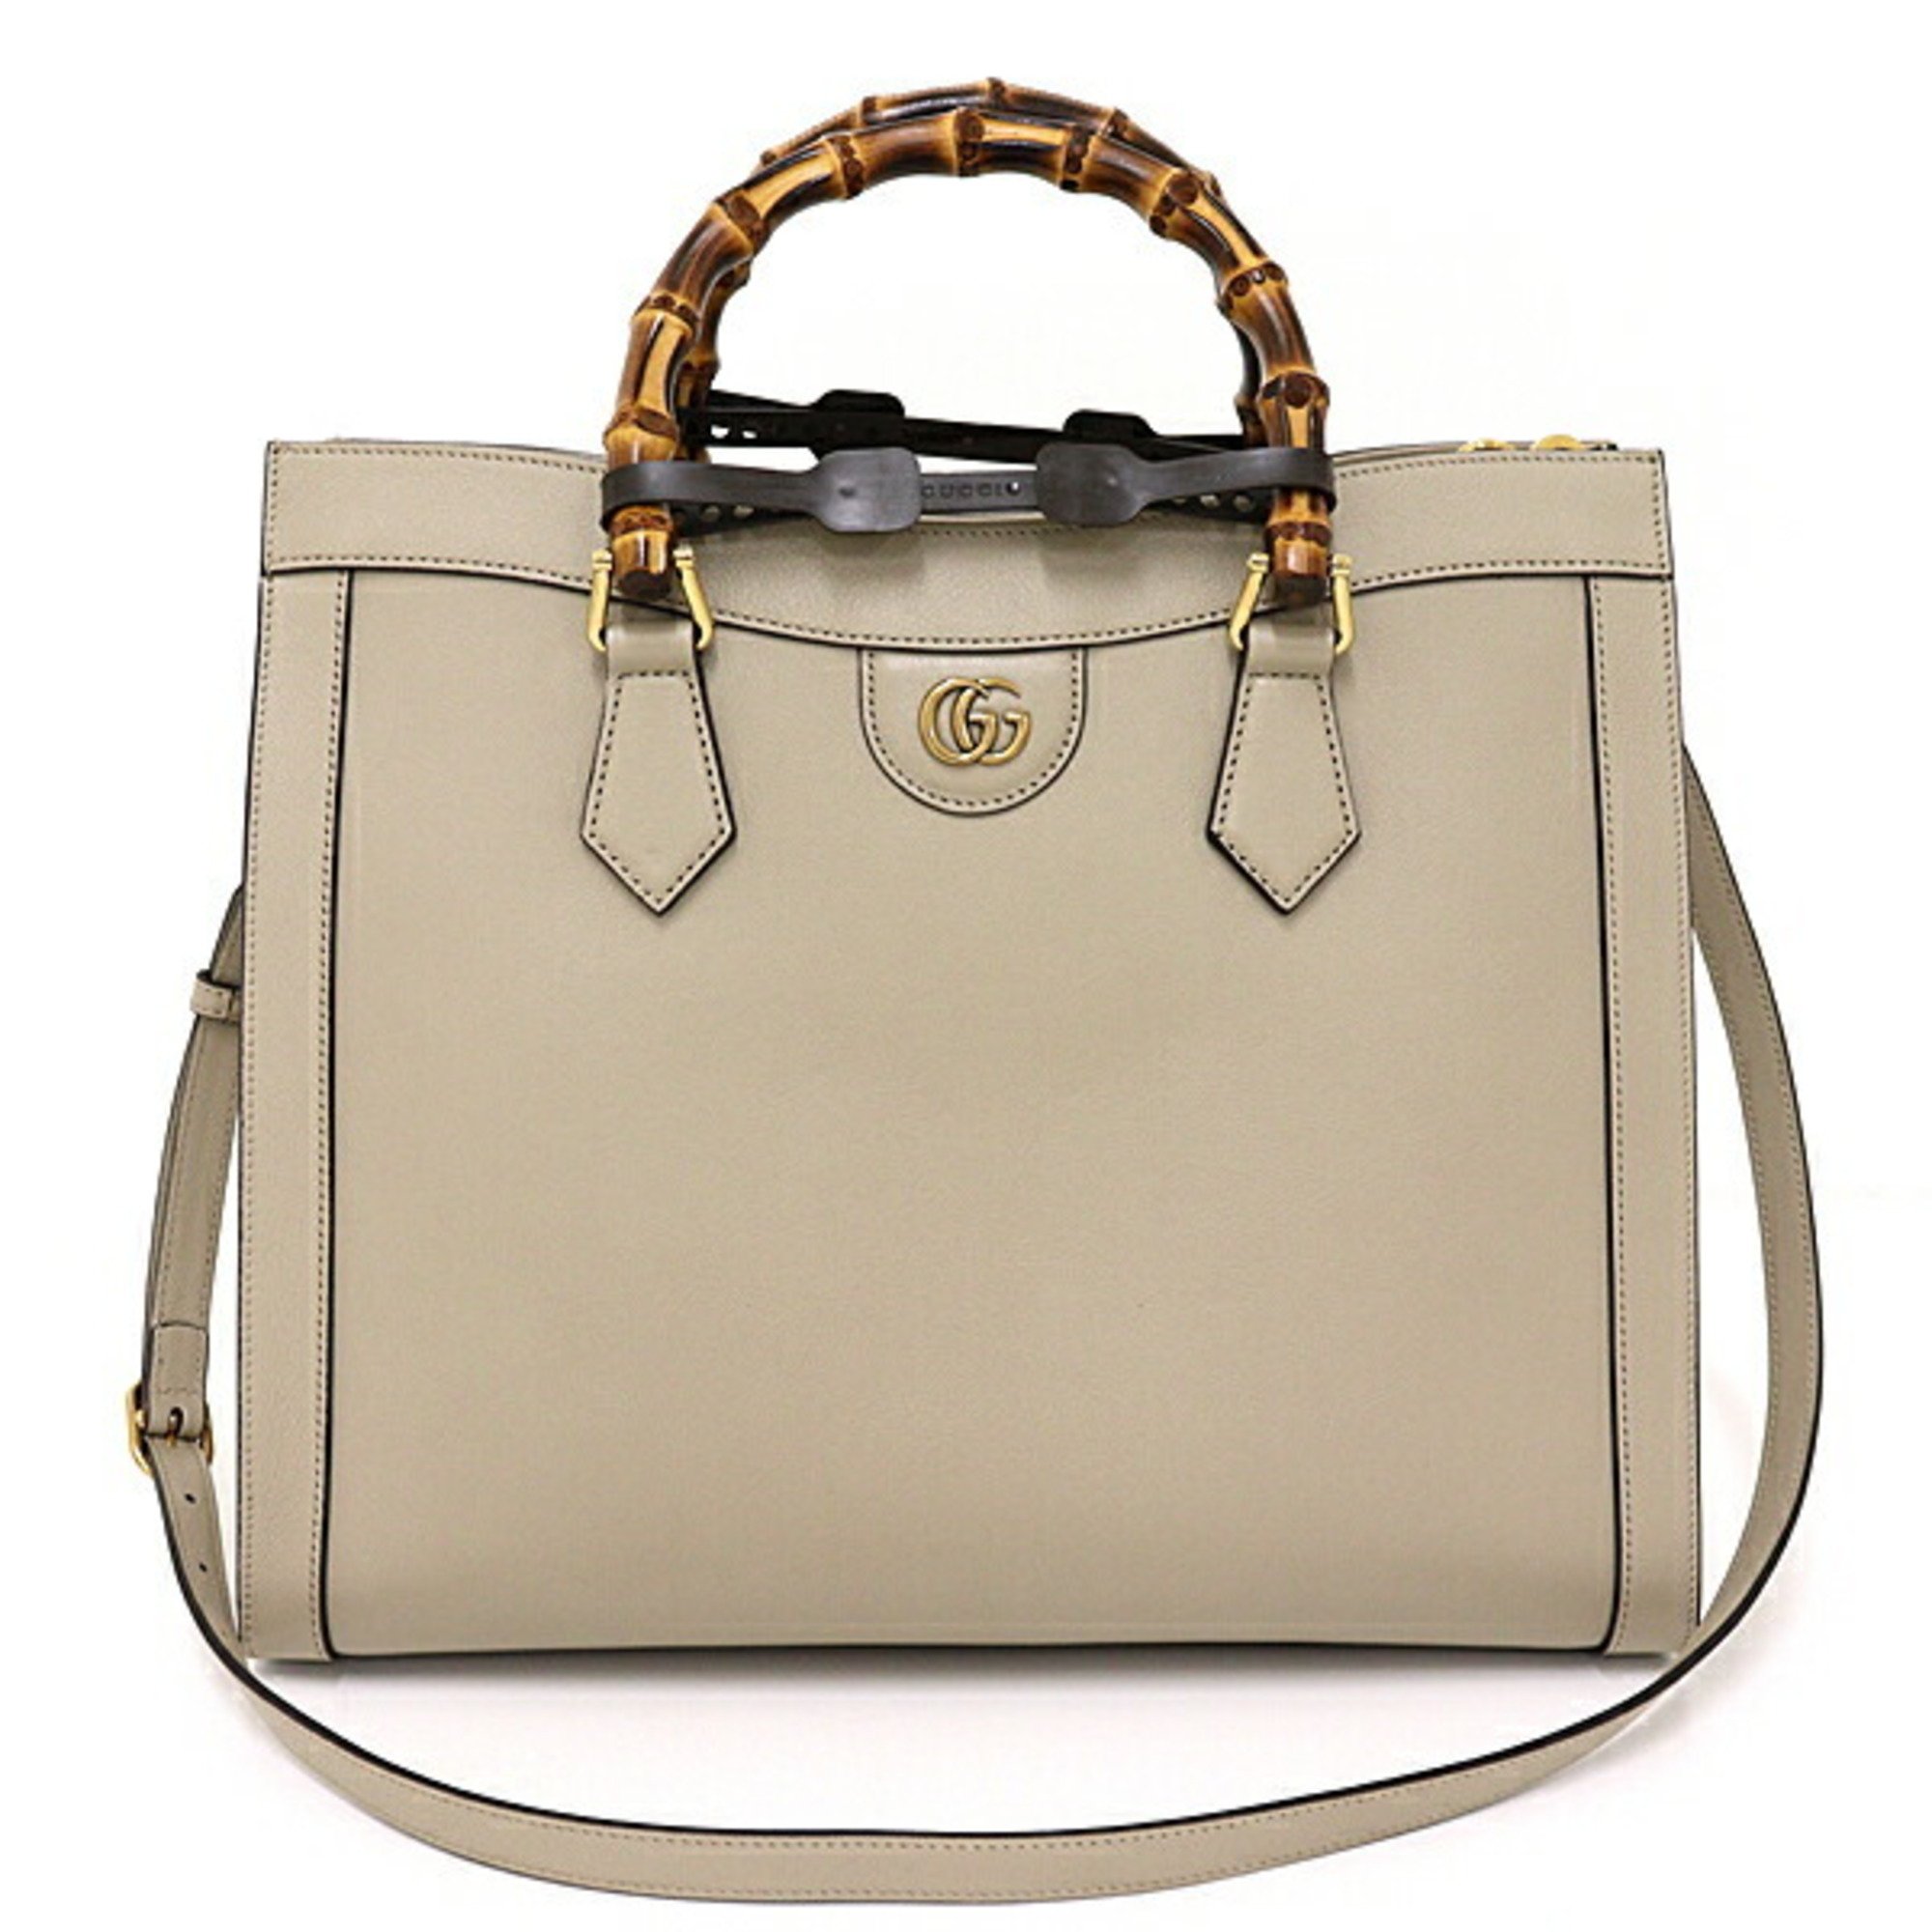 GUCCI Diana Medium Tote Bag Bamboo Double G Leather 655658 Beige